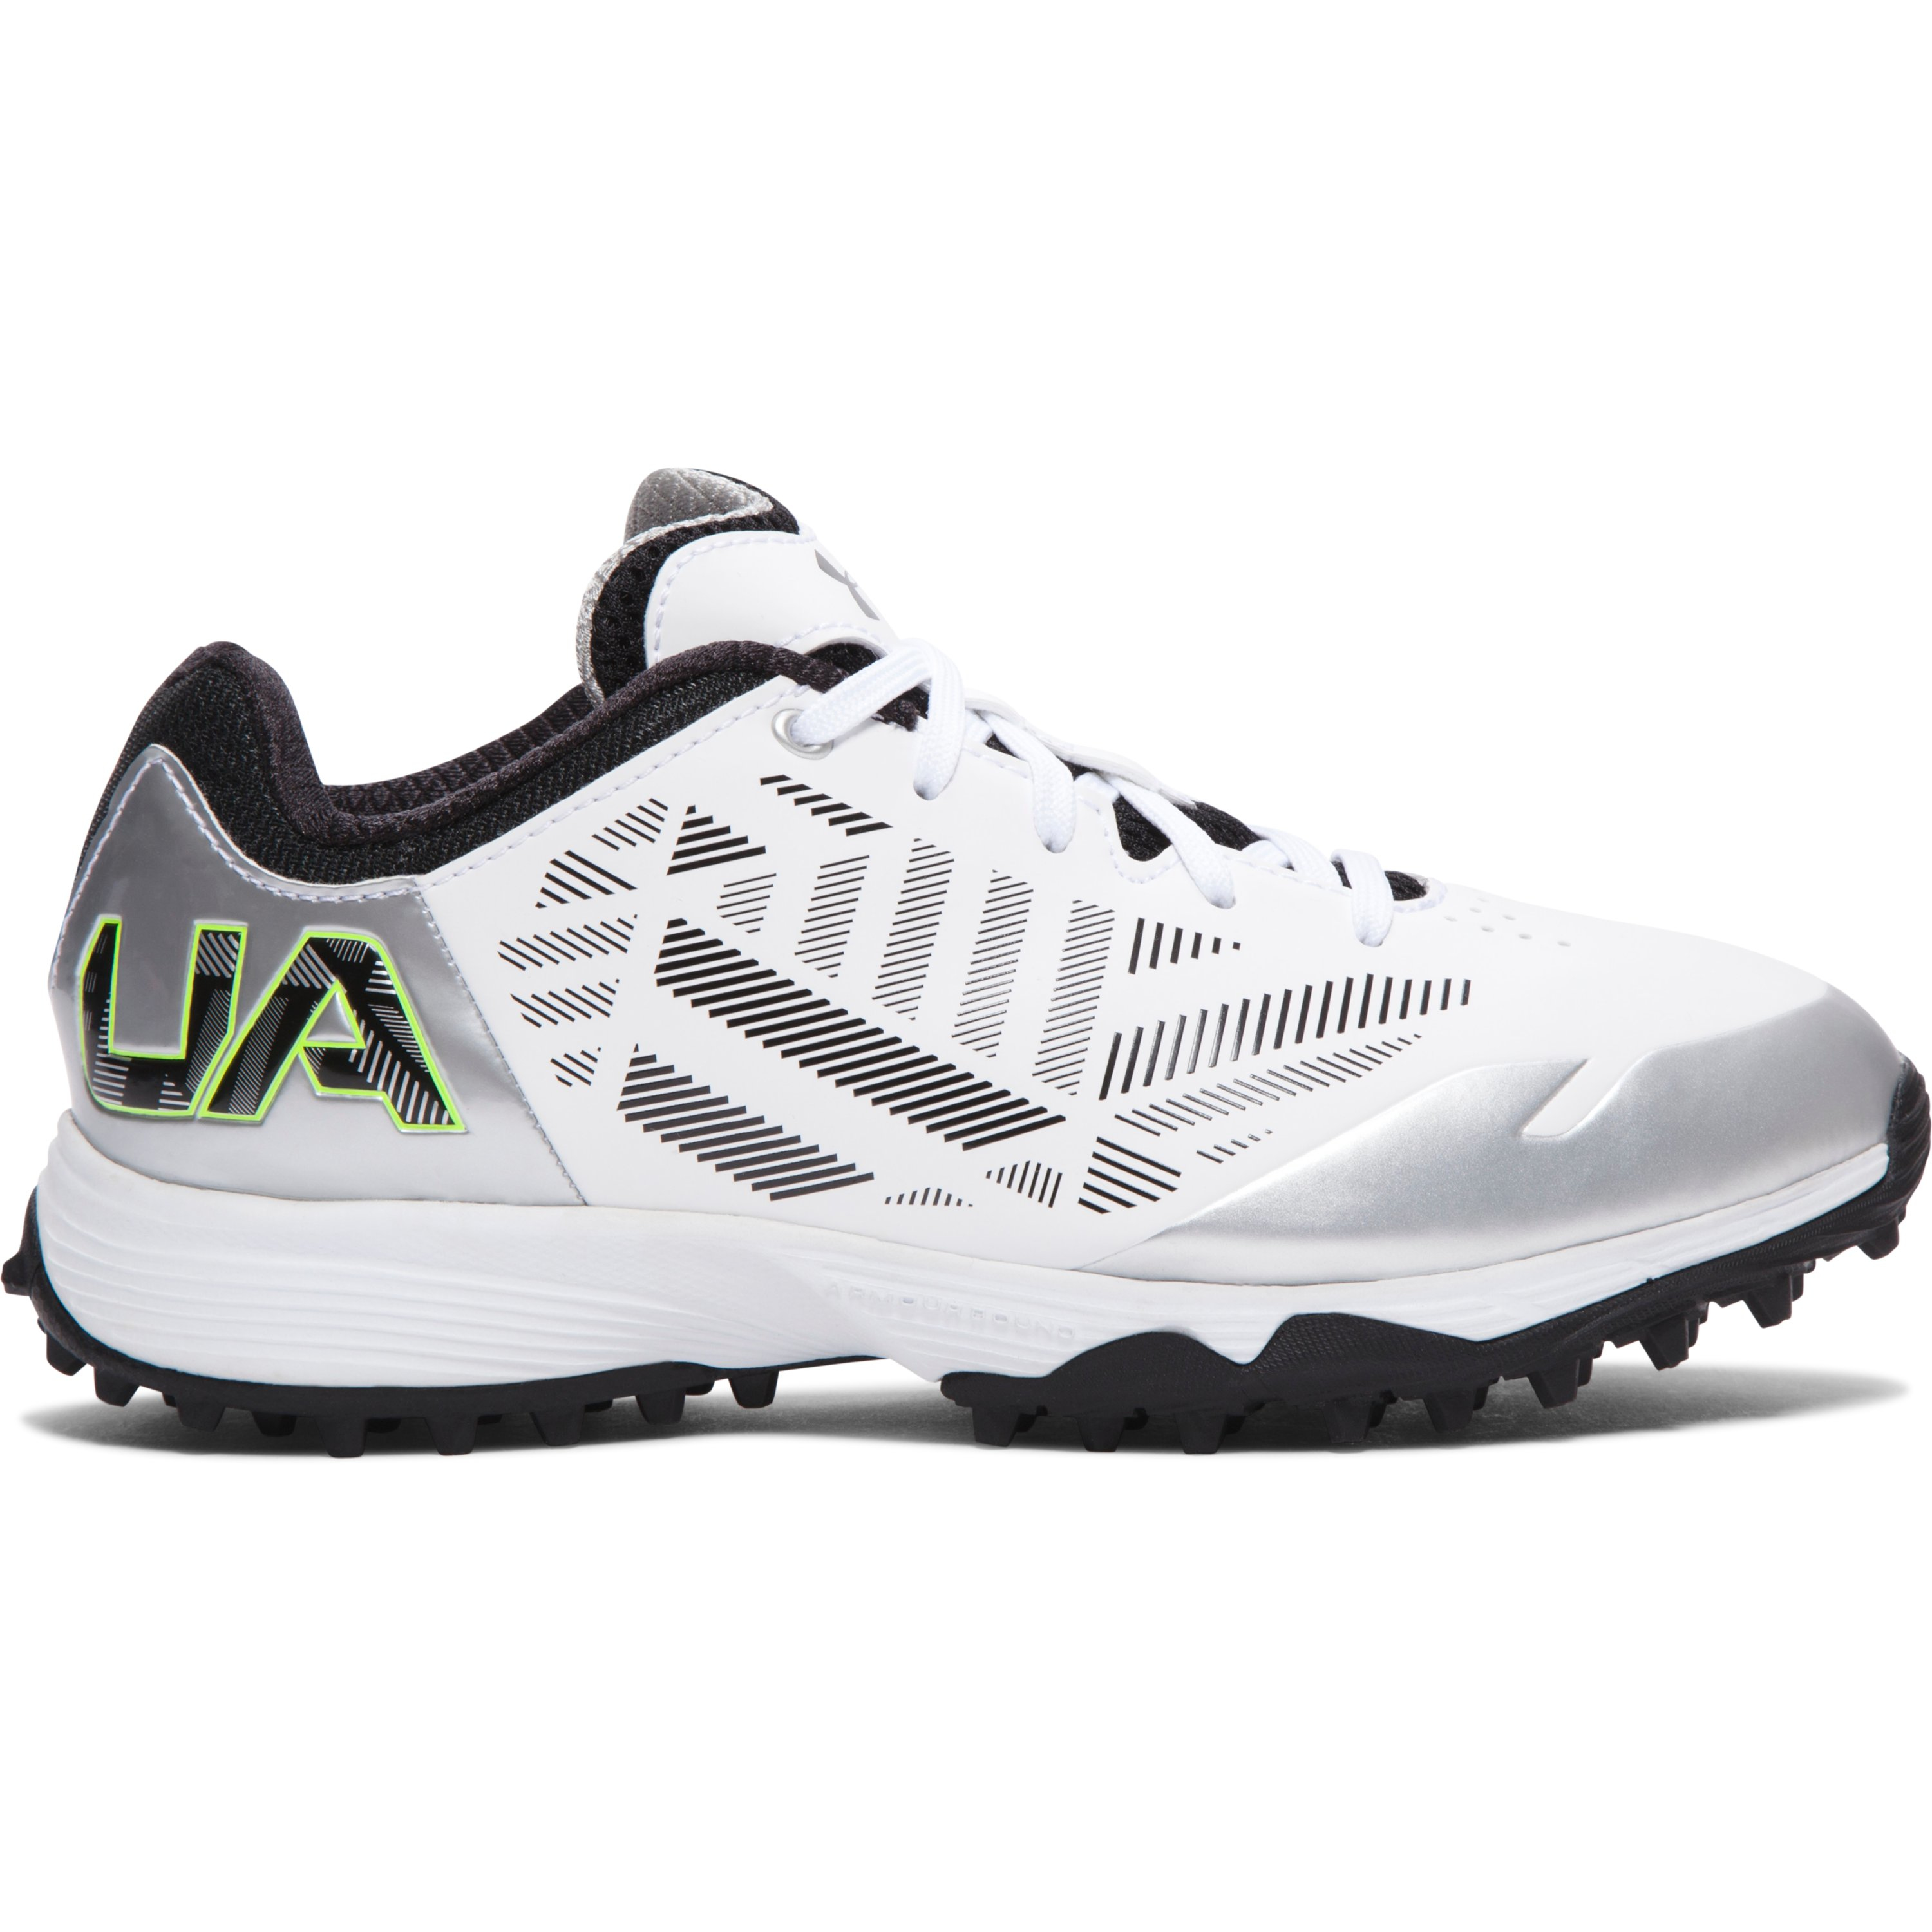 Under Armour Synthetic Womenâs Ua Finisher Ii Turf Shoes in White - Lyst